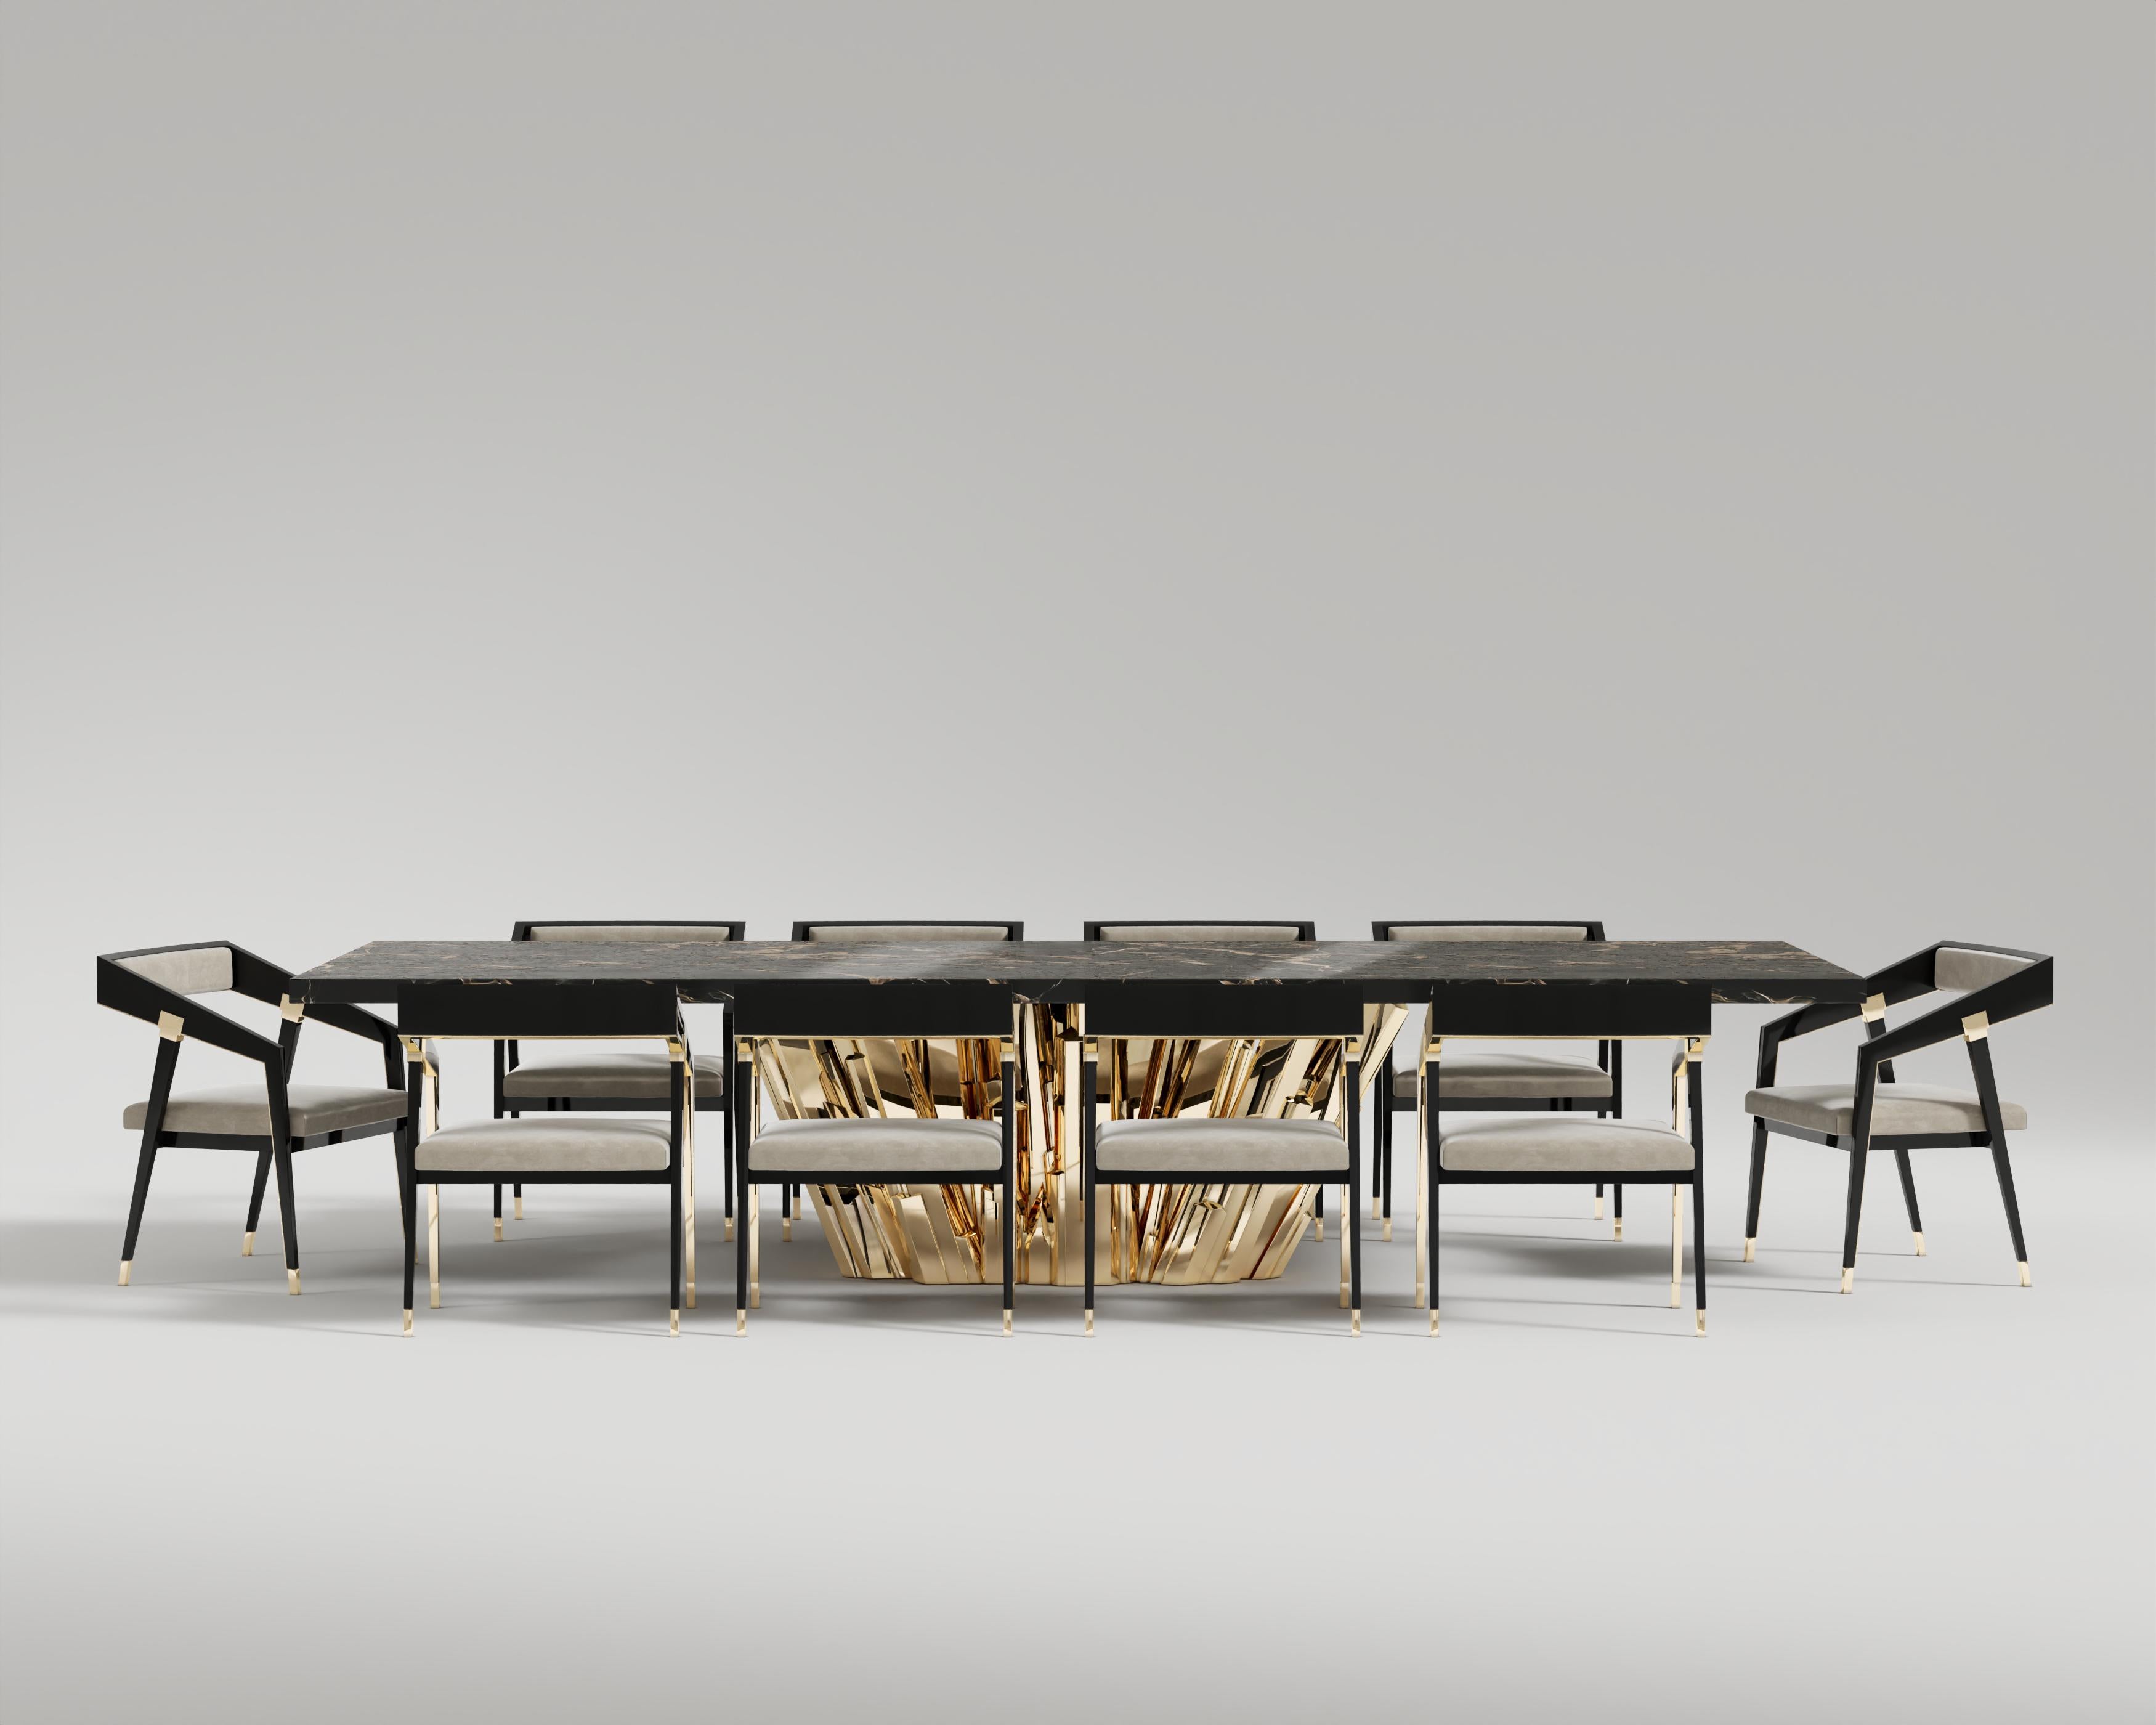 Meta Crystal Dining Table
Revealing its luxuriant character, the Meta Crystal invites you to delve into an atmosphere of pure sophistication. Pairing a natural slab with a contrasting bronze base, the Meta Crystal Dining Table brings grace and